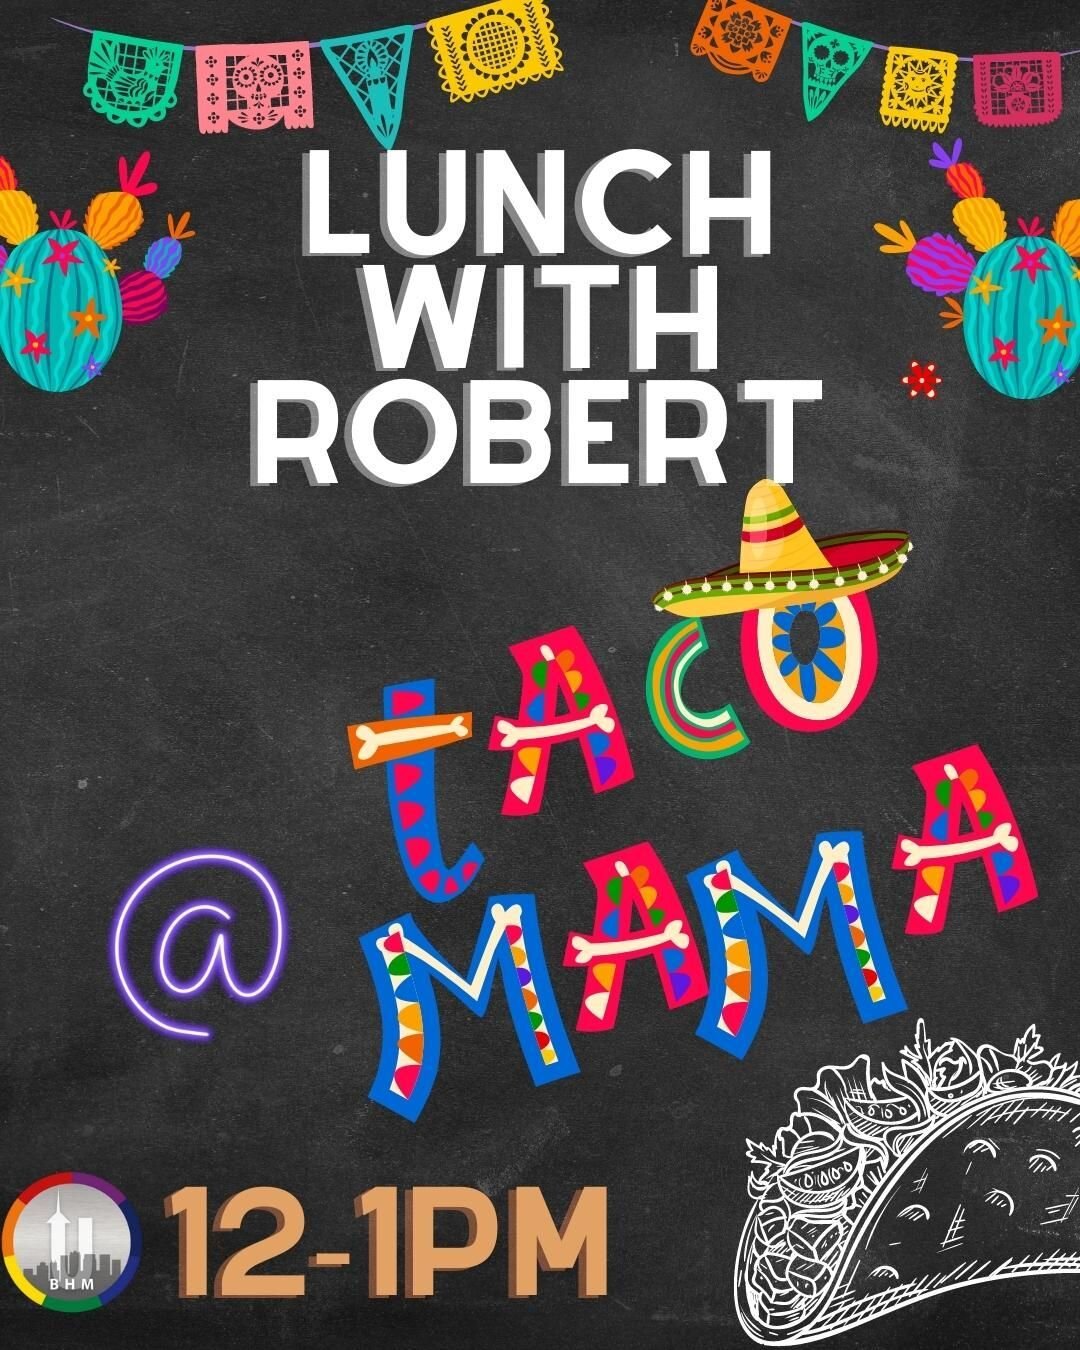 Lunch with Robert at the Taco Mama in Vestavia Hills from 12-1pm!